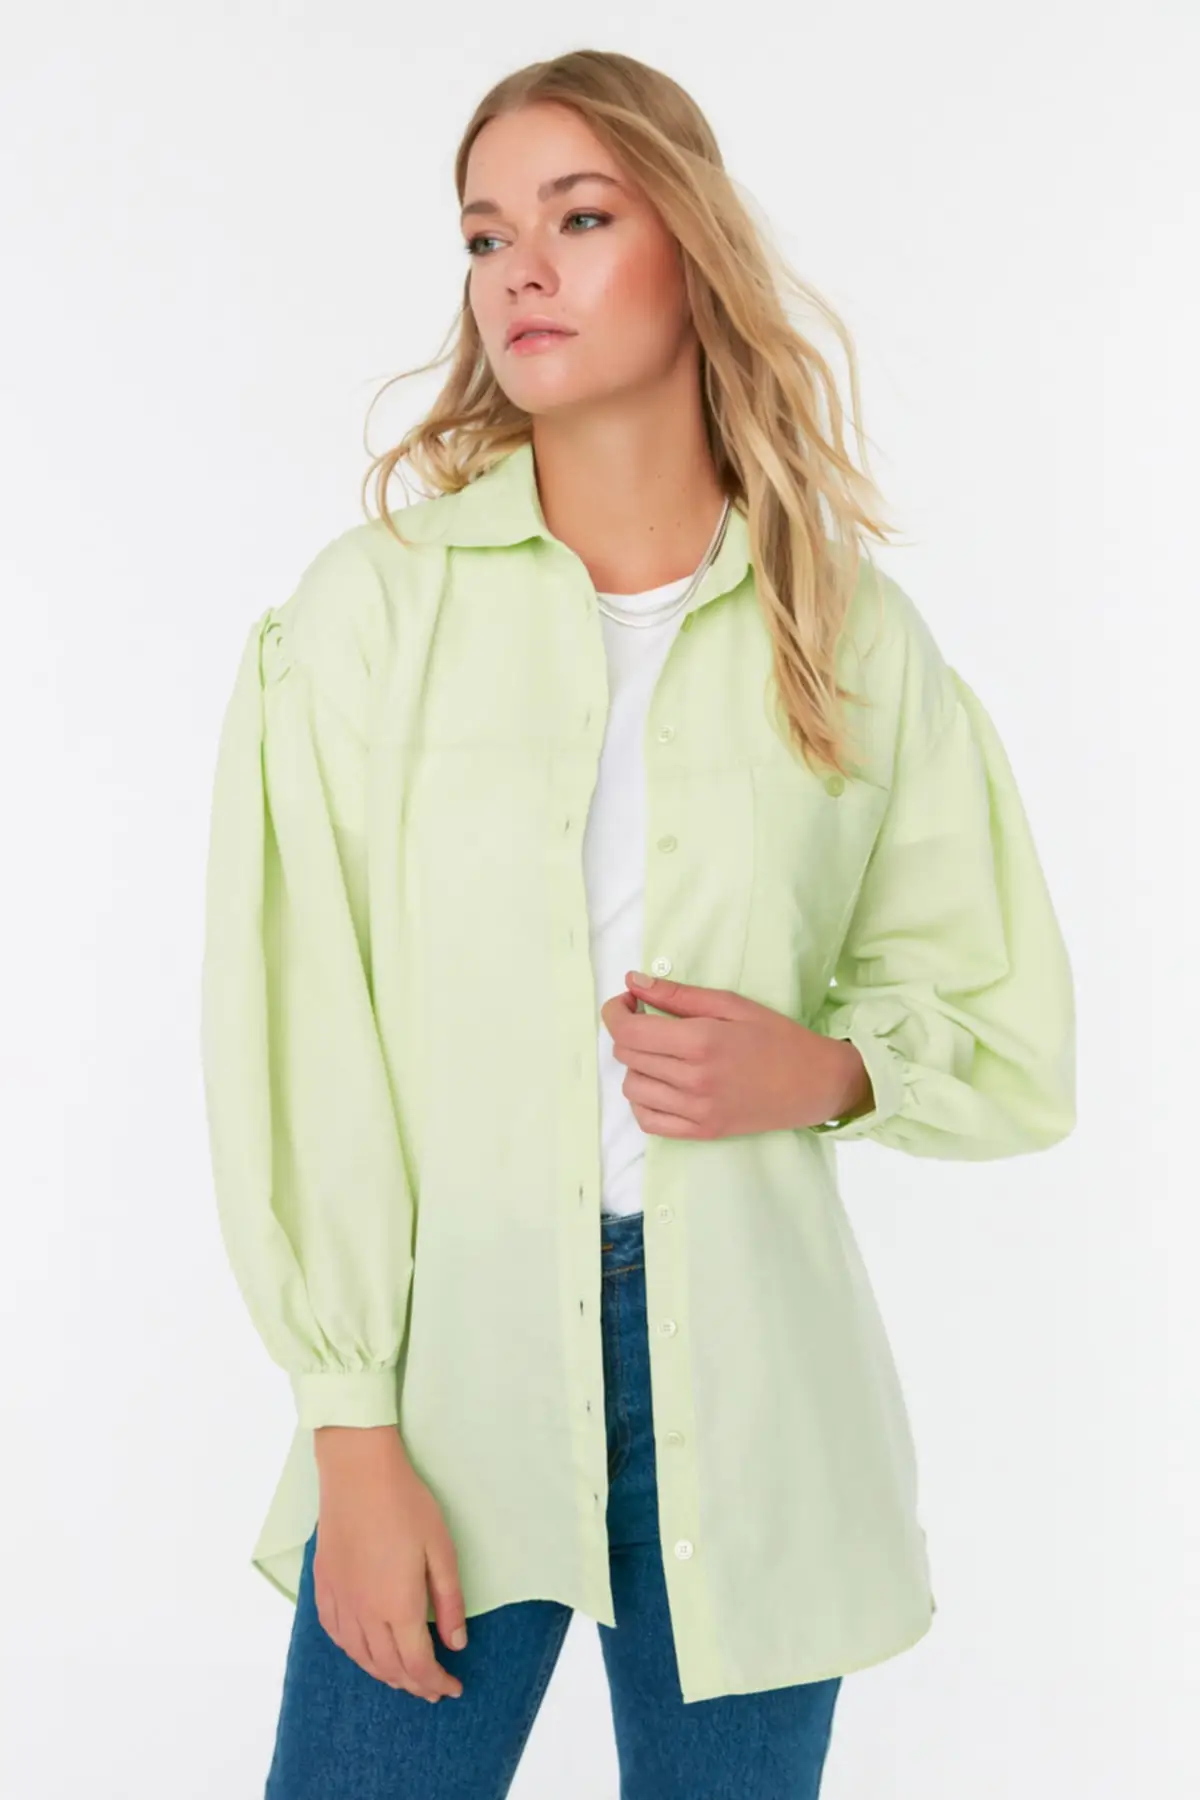 Mint Balloon Sleeve Back Long Pocket Detail Basic Woven Shirt TCTSS21GO0976 Additional Feature Available Don 'T Single Flat Casual Collar